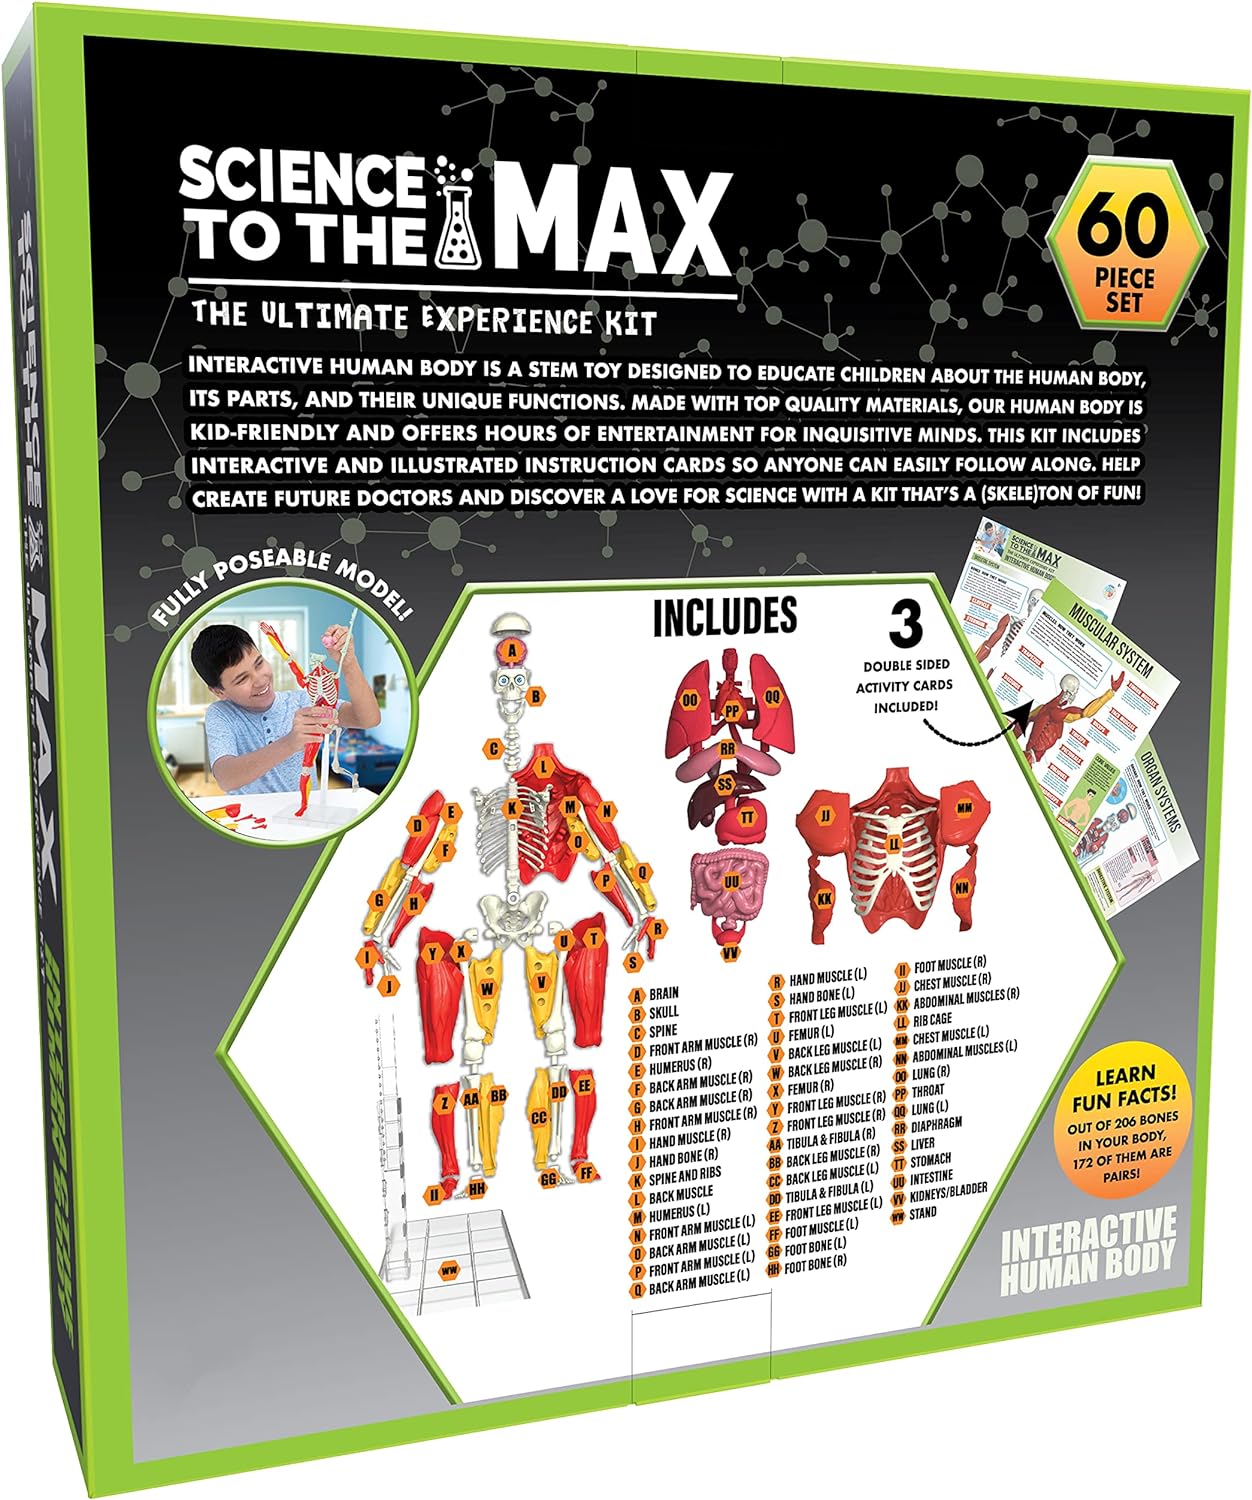 Be Amazing! Toys Interactive Human Body - 60 Piece Fully Poseable Anatomy Figure – 14” Tall Model - Anatomy Kit – Removable Muscles, Organs,Bones STEM Toy – Ages 8+ : Toys Games